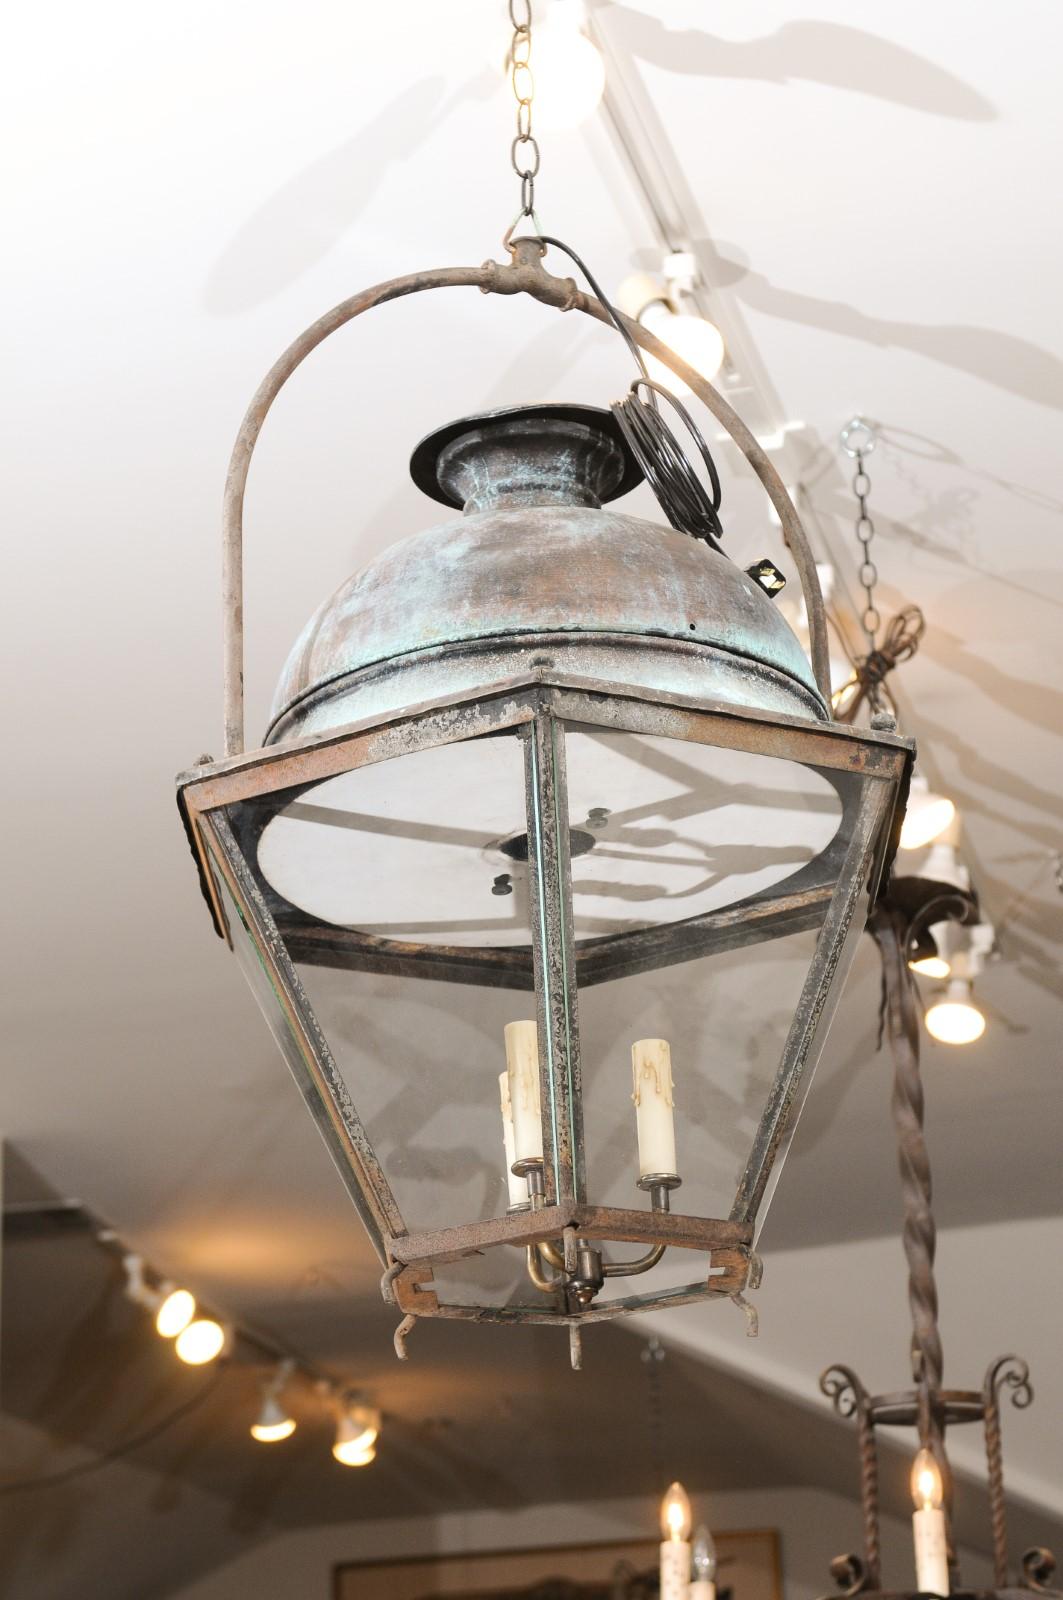 French Provençal Turn of the Century 1900s Copper and Iron Hexagonal Lantern 6